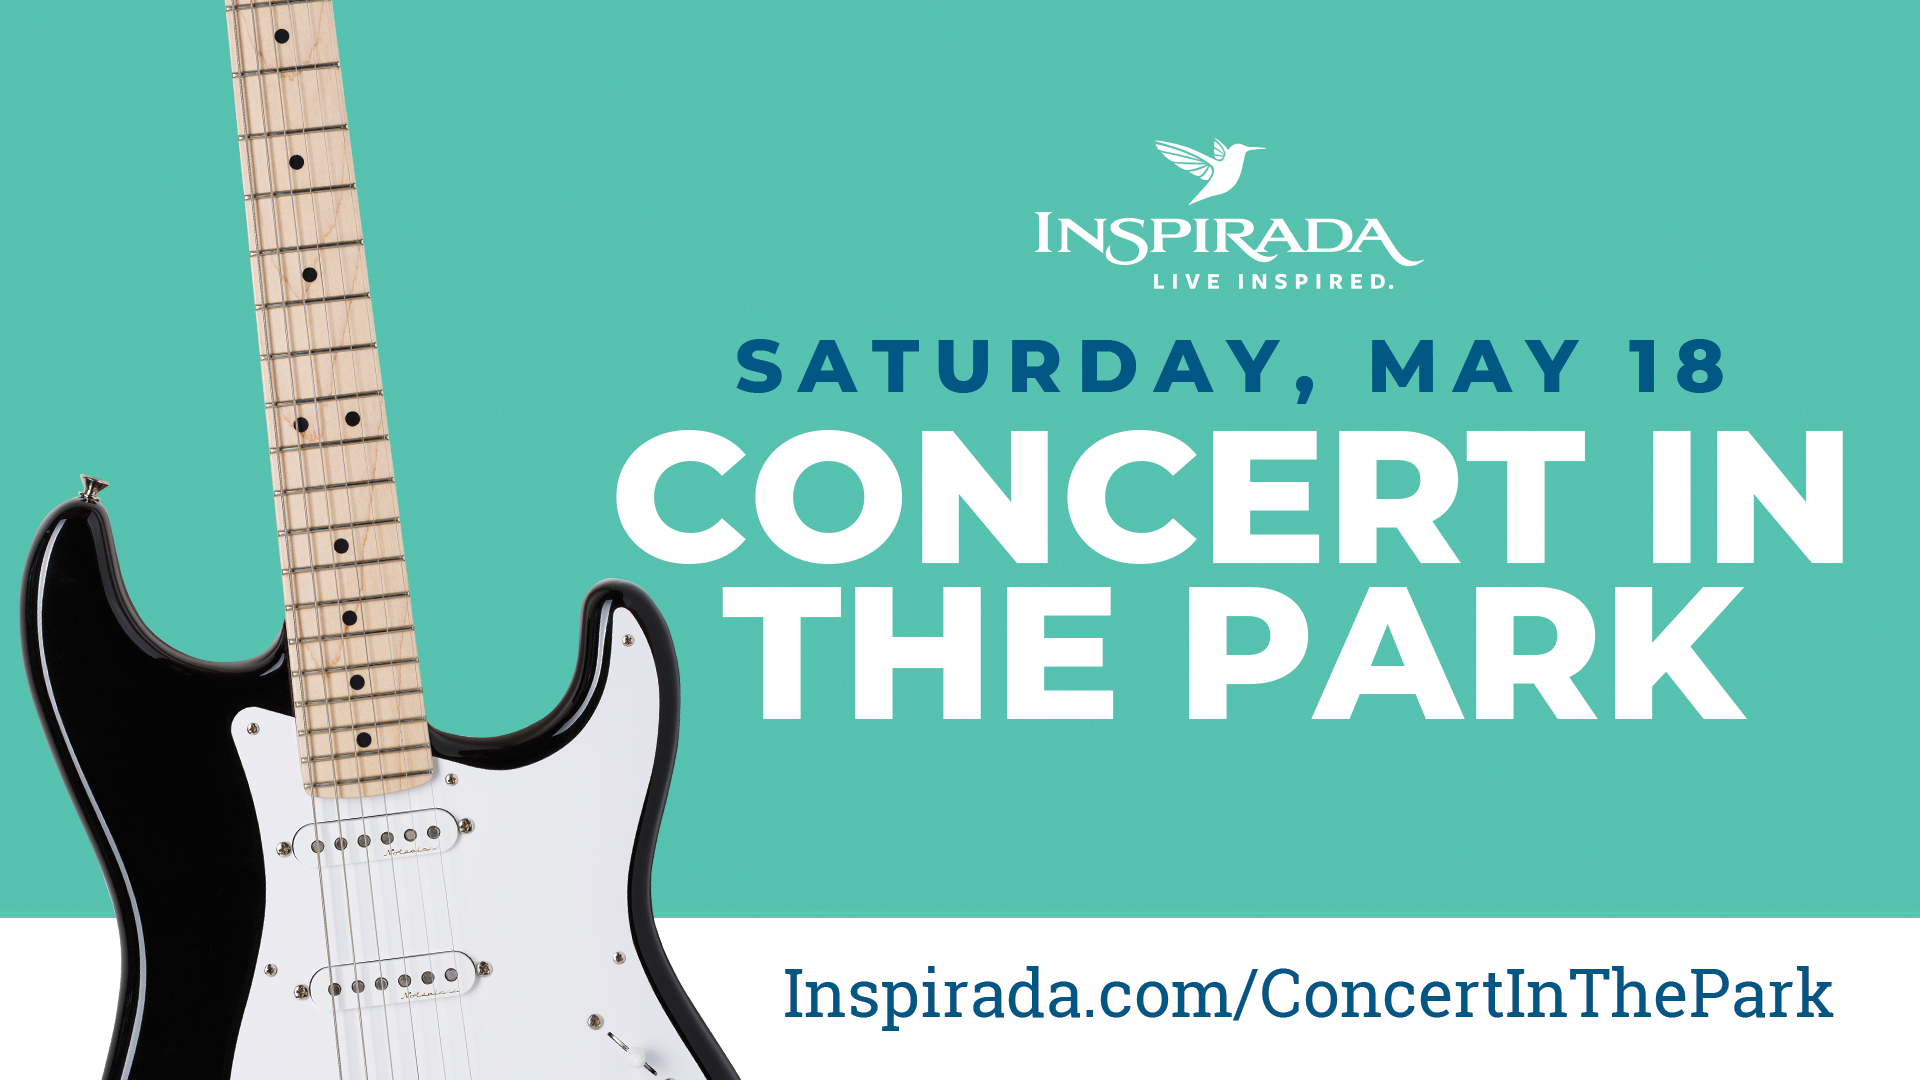 concert in the park graphic